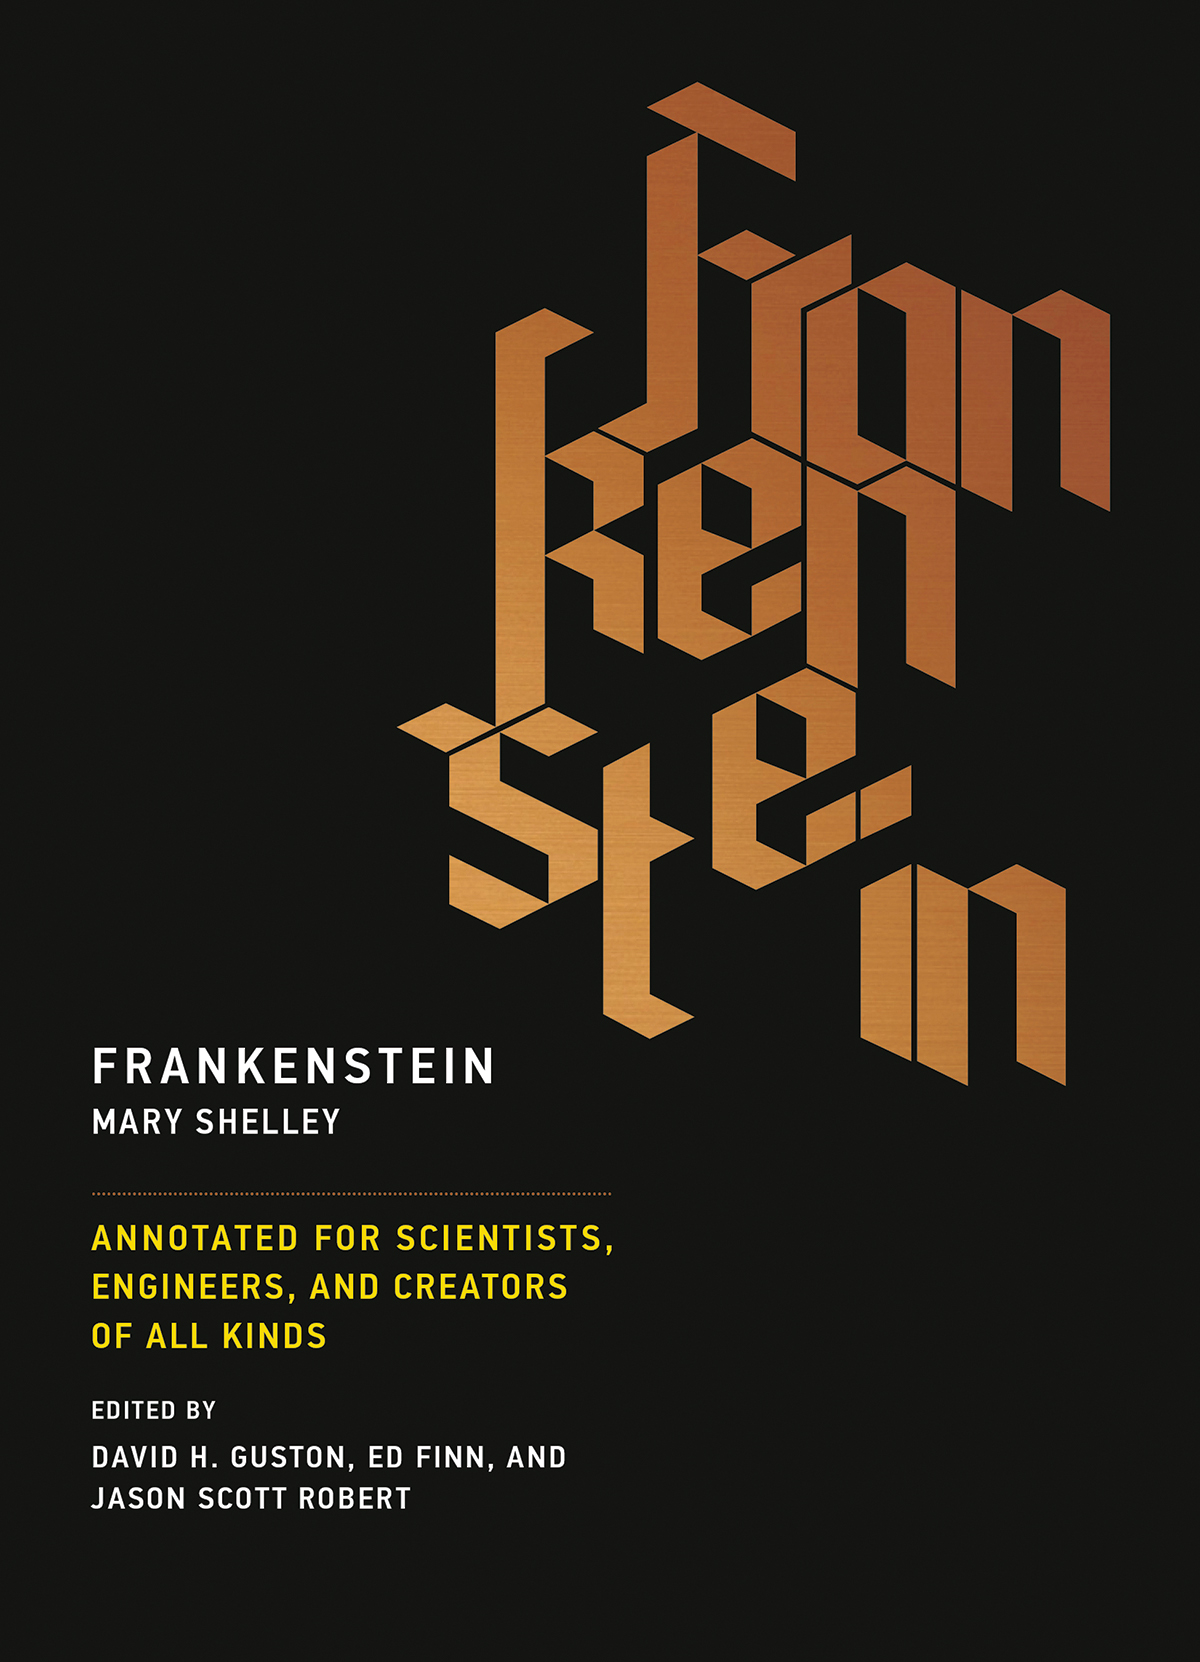 Frankenstein Book Cover Frankenstein written in angular typeface. Written by Mary Shelley. Annotated for Scientists, Engineers, and Creators of all kinds. Edited by David H. Guston, Ed Finn, and Jason Scott Robert